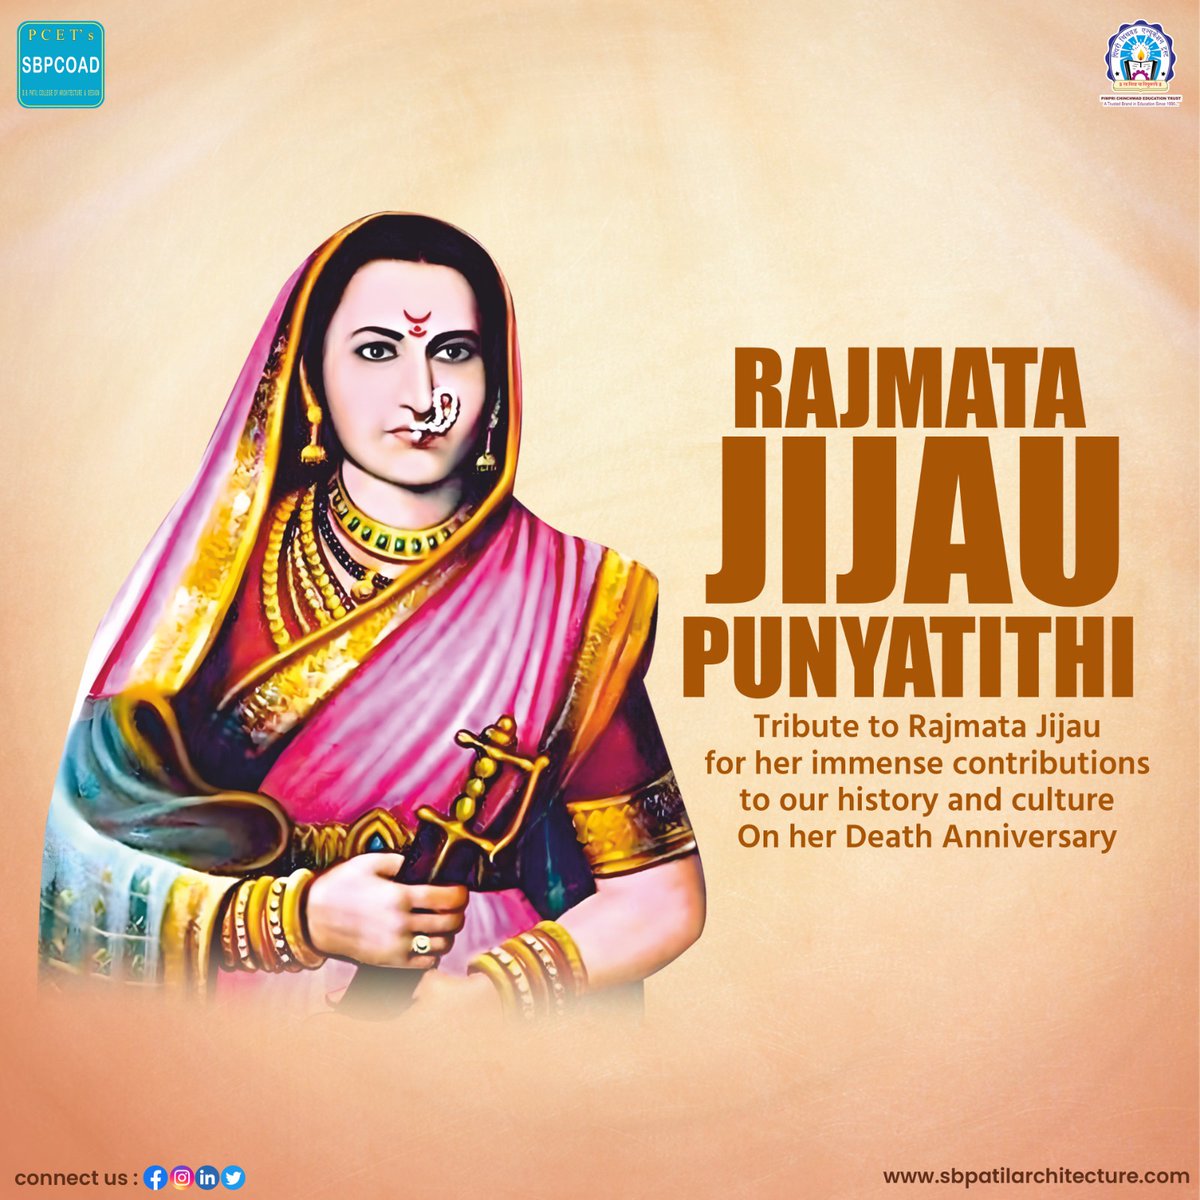 We pay tribute to #RajmataJijau for her immense contributions to our history & culture. Her legacy lives on, reminding us of  importance of determination, compassion, & power of a mother's love.

#PCET #SBPCOAD #jijau #shivajimaharaj #swarajya #pune #JayJijauJayShivray #tribute